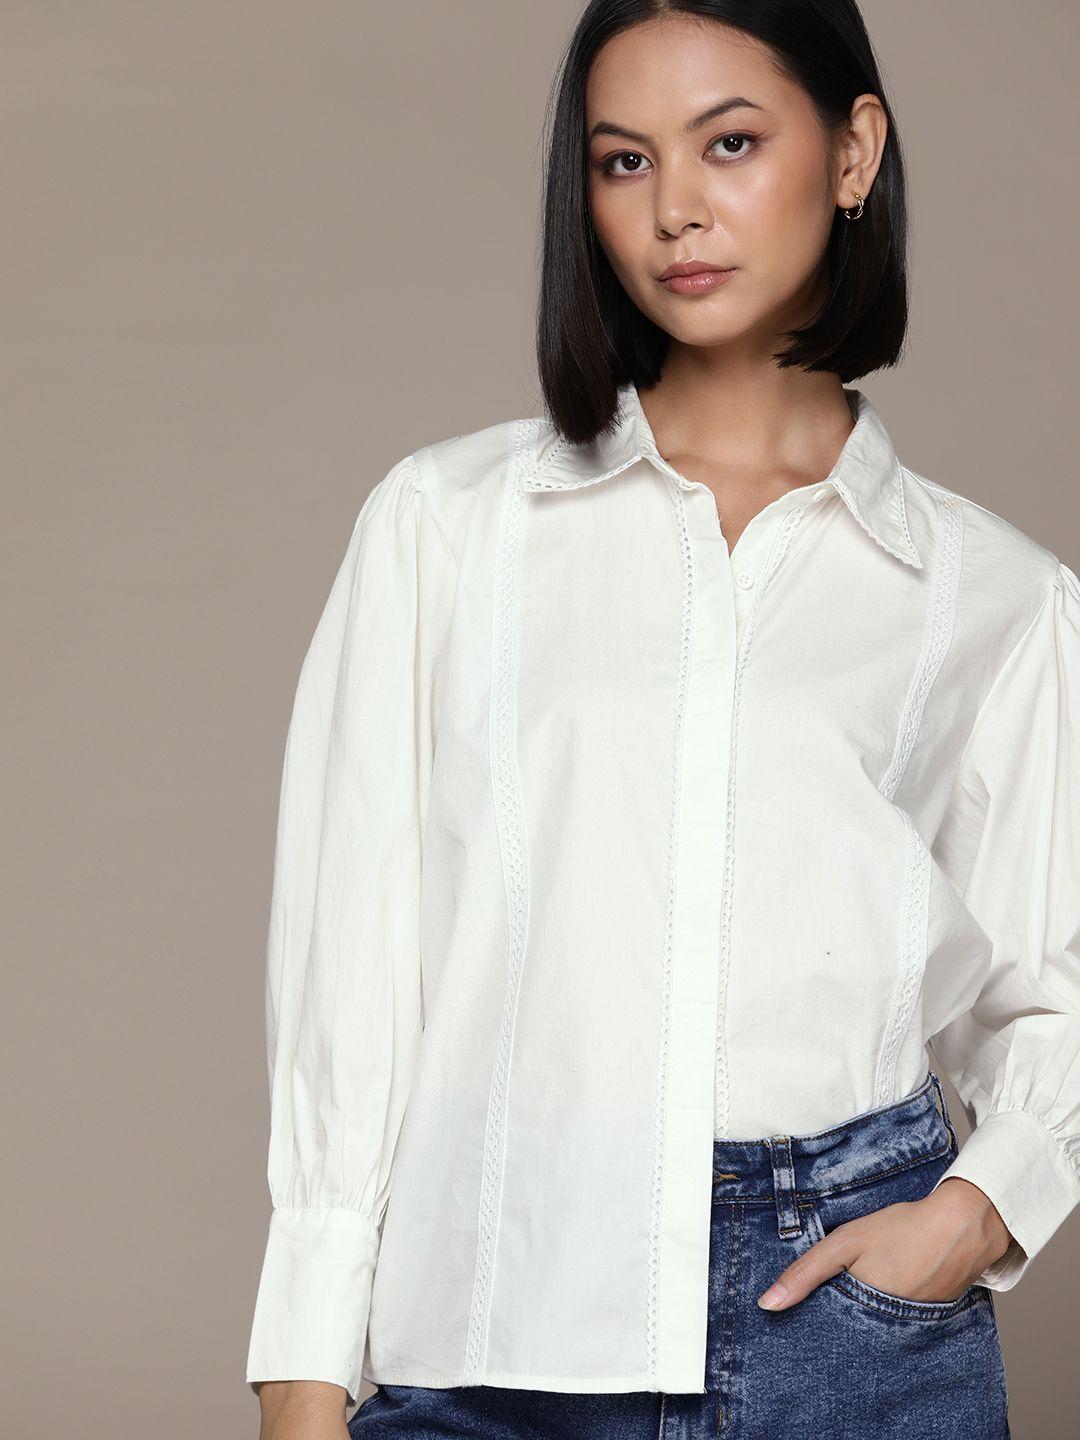 the roadster lifestyle co. women pure cotton lace detail casual shirt